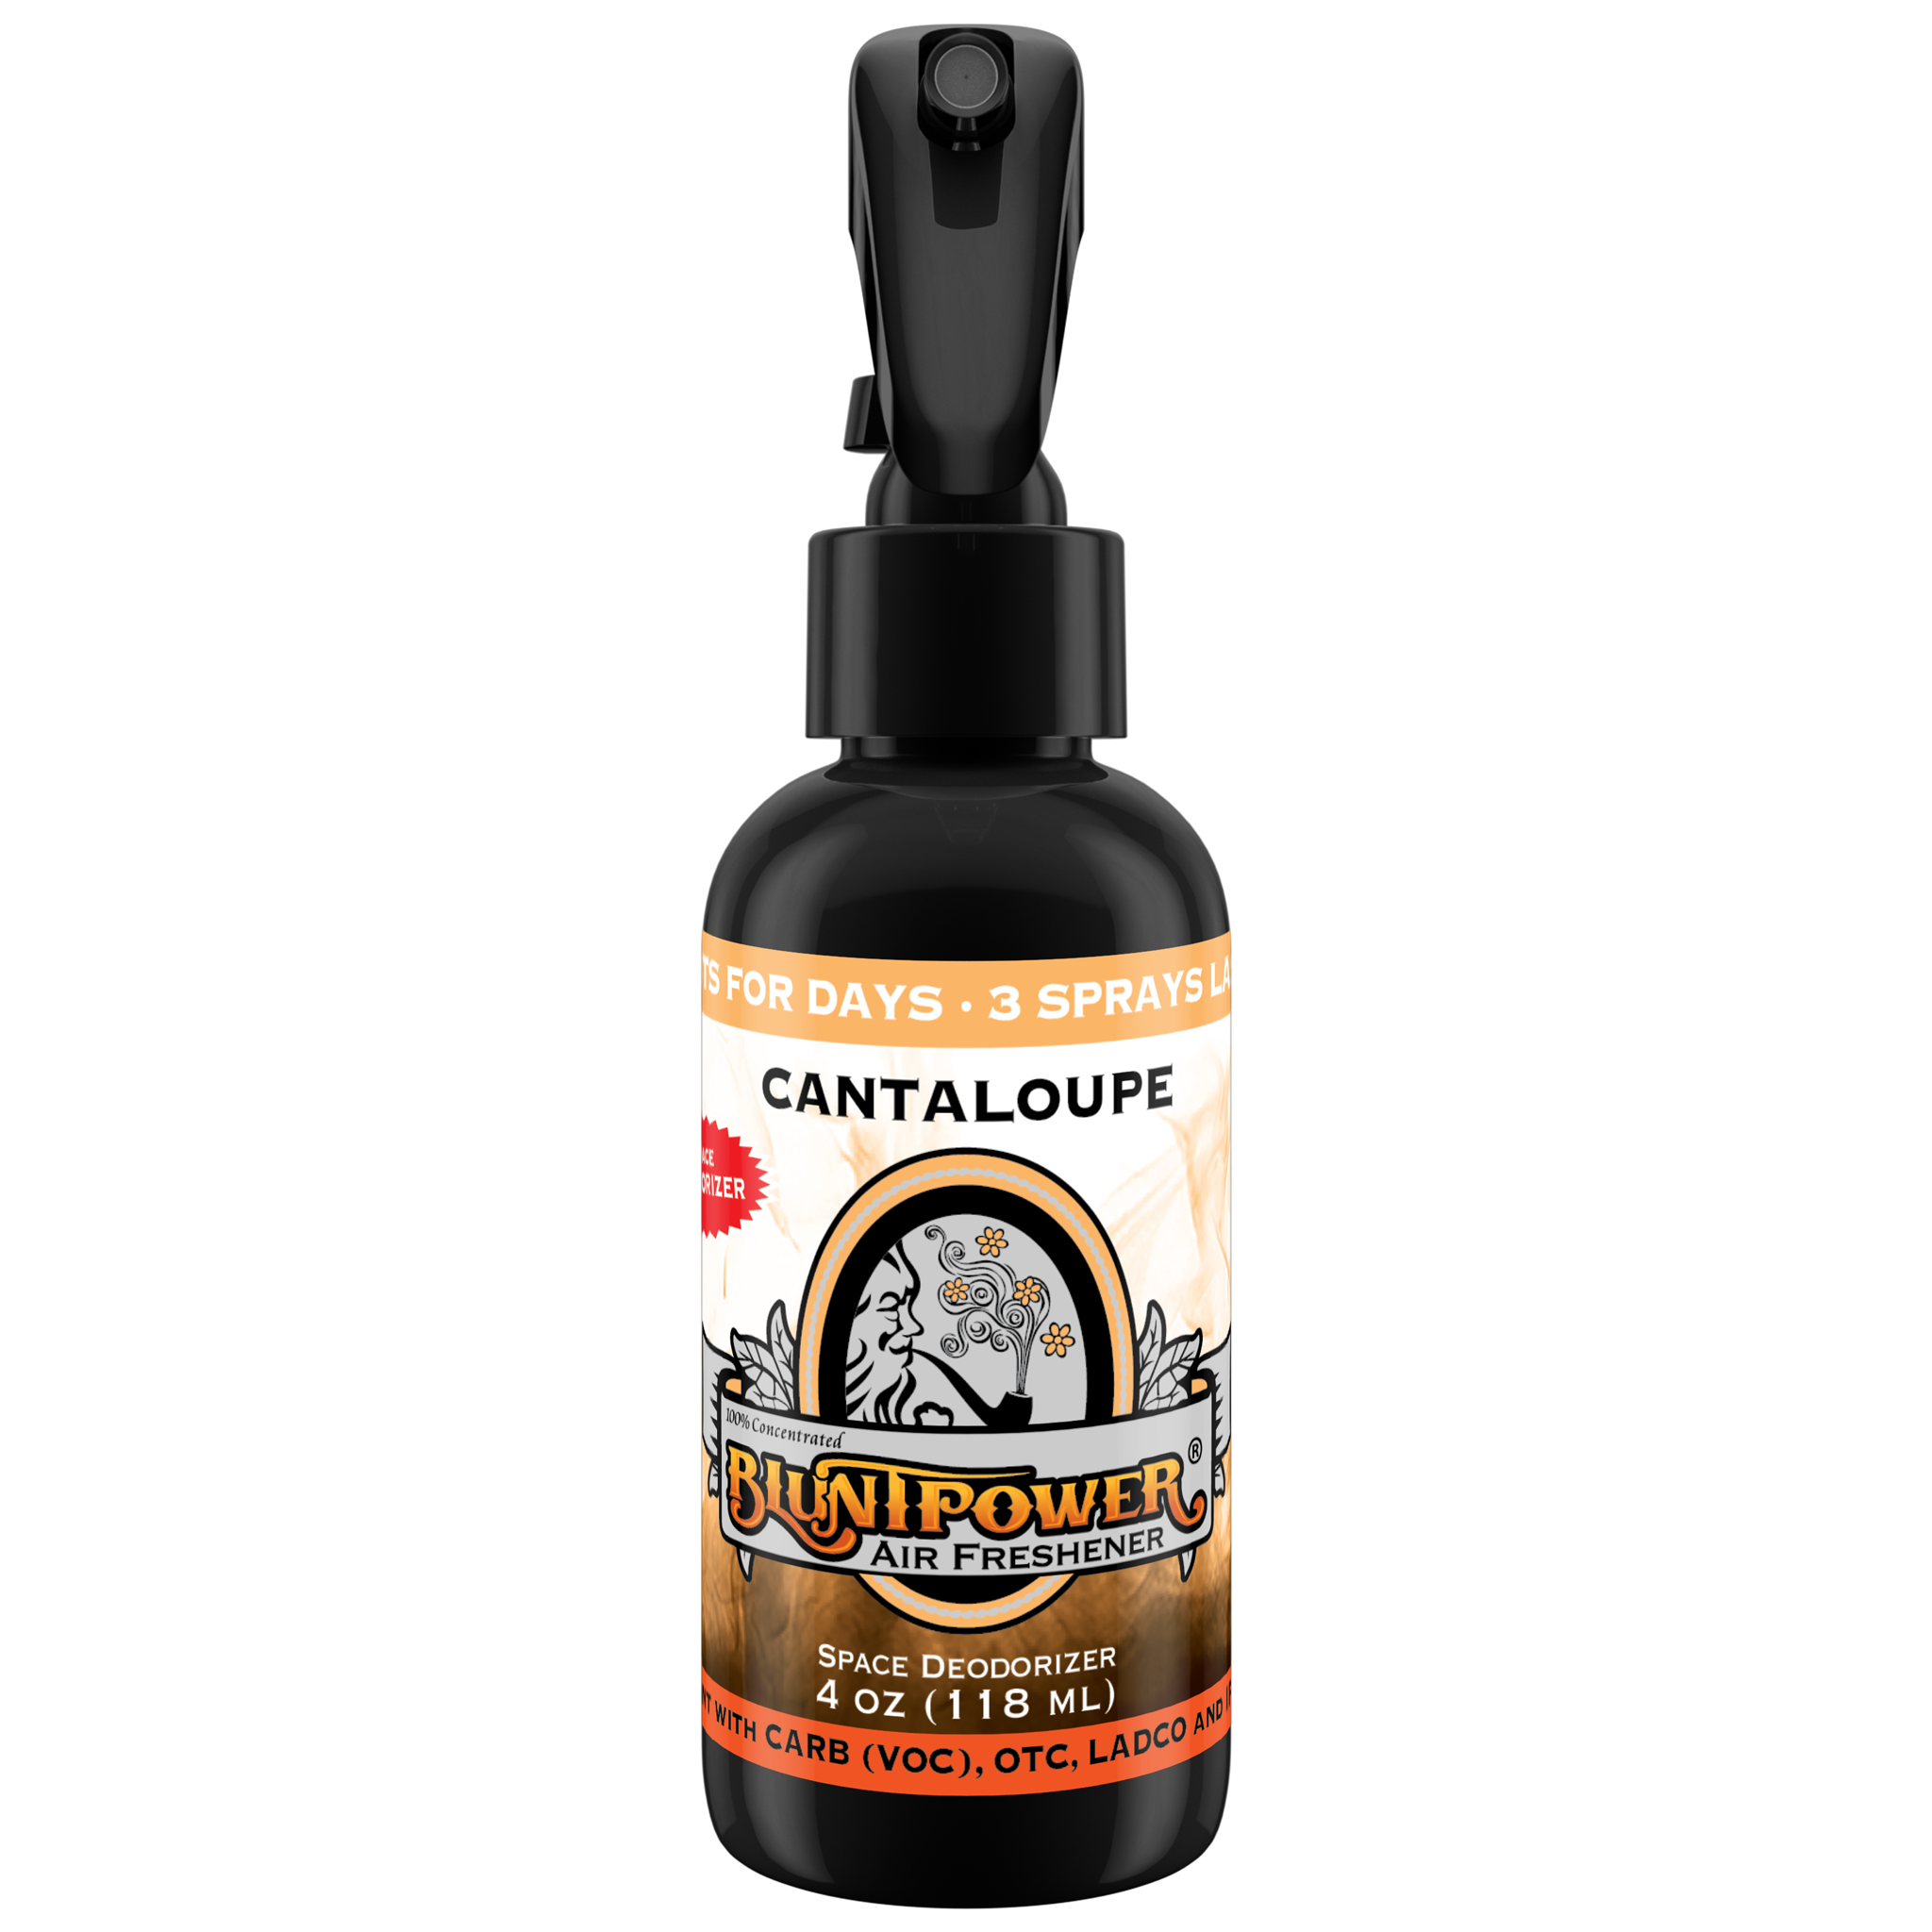 BluntPower Air Freshener - Cantaloupe Scent